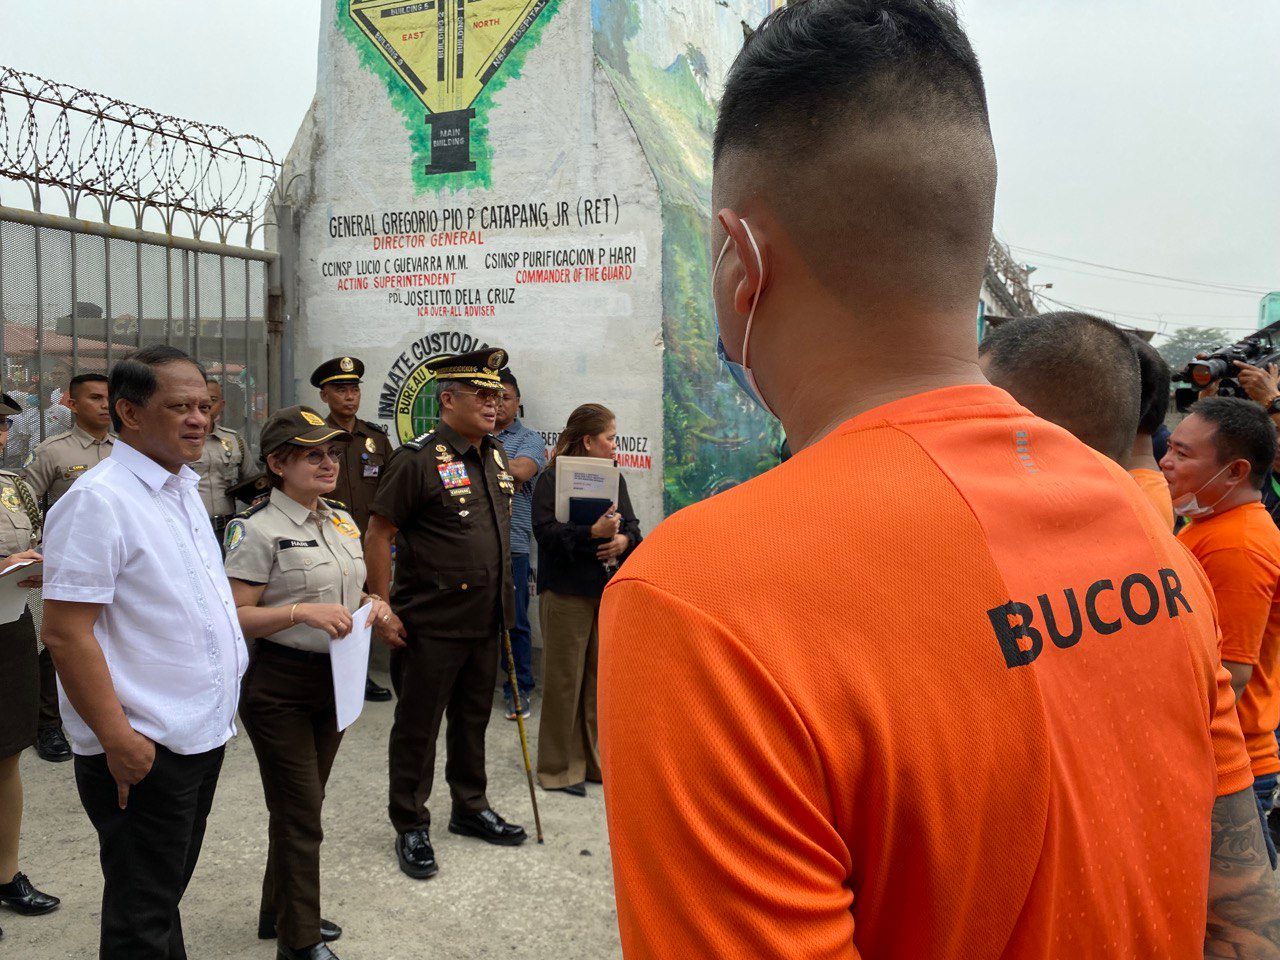 BuCor chief Catapang fires Bilibid maximum security compound chief, guards